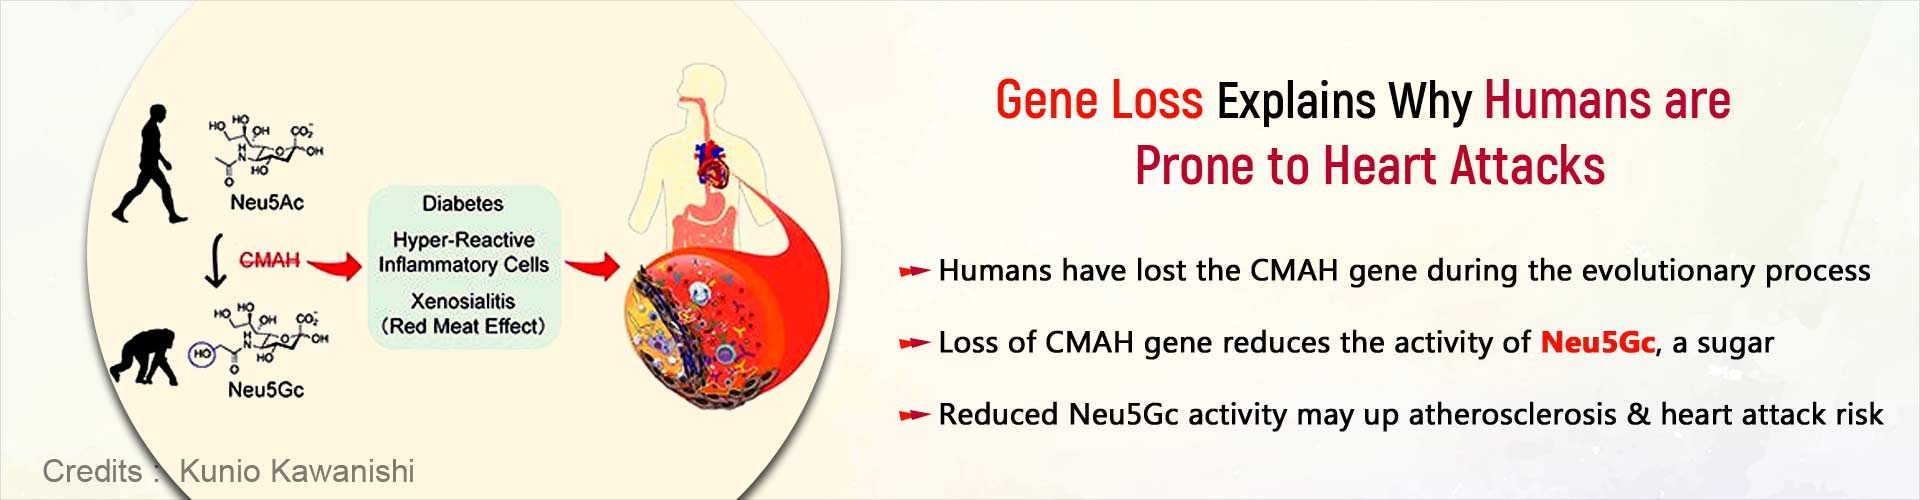 Gene loss explains why humans are prone to heart attacks. Humans have lost the CMAH gene during the evolutionary process. Loss of CMAH gene reduces the activity of Neu5Gc, a sugar. Reduced Neu5Gc activity may up atherosclerosis and heart attack risk.